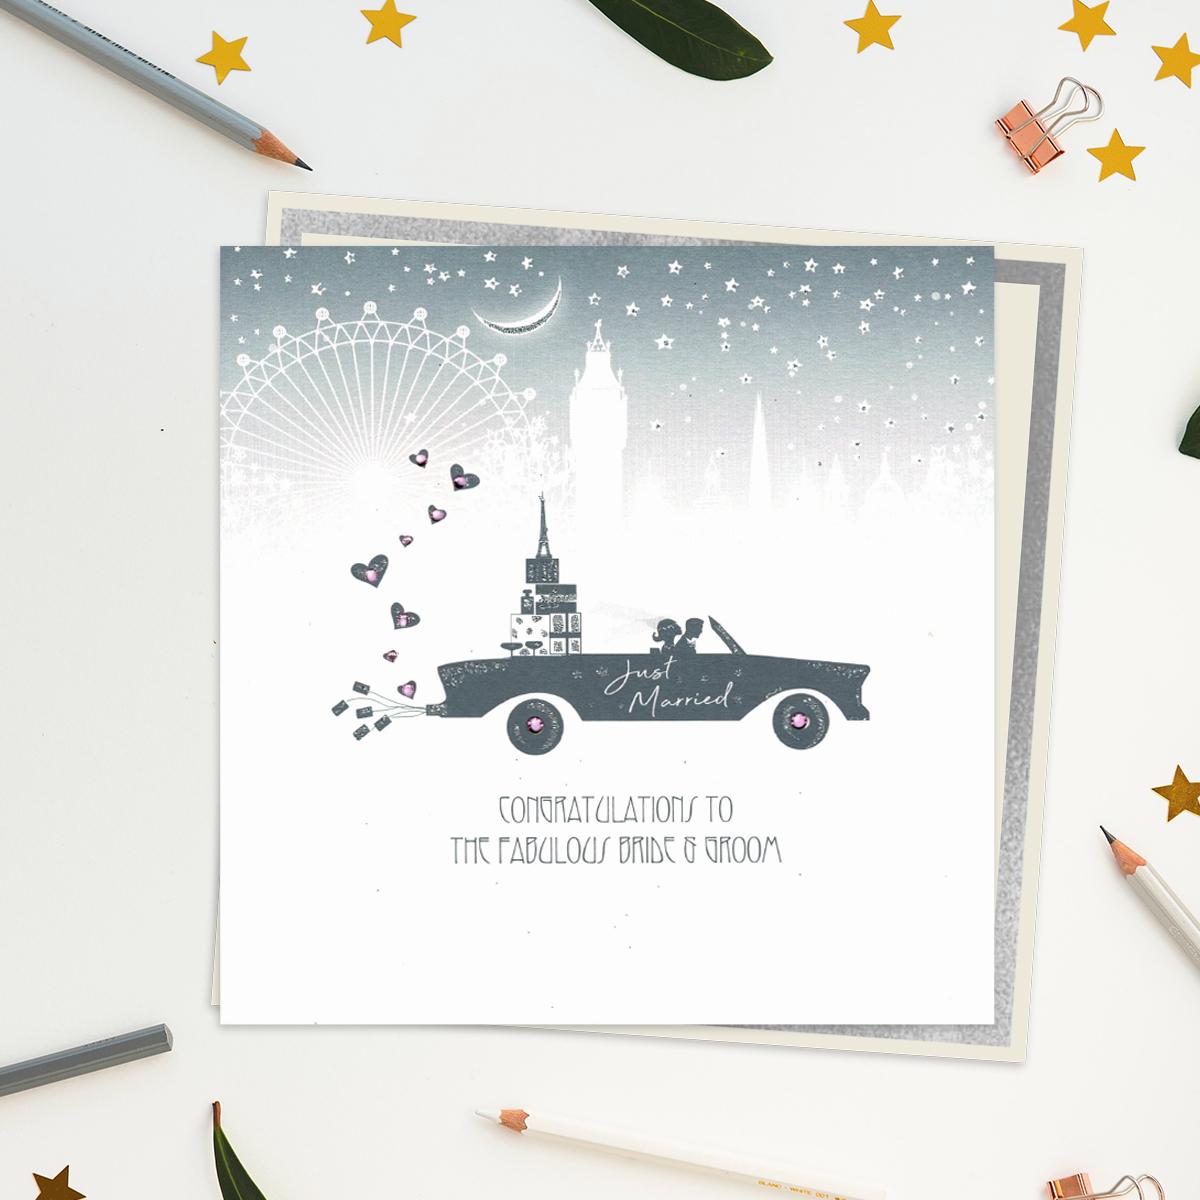 Stunning, Luxury, Handcrafted Wedding Day Design From Five Dollar Shake. Image Shows A Black Car In Silhouette Full Of Gifts With A Skyline In The Background. On The Side Of The Car Is Written-Just Married. Caption: Congratulations To The Fabulous Bride And Groom. With Jewel Embellishments And Biodegradable Glitter Accents. Blank Inside For Own Message. Warm White Envelope With Silver Border.